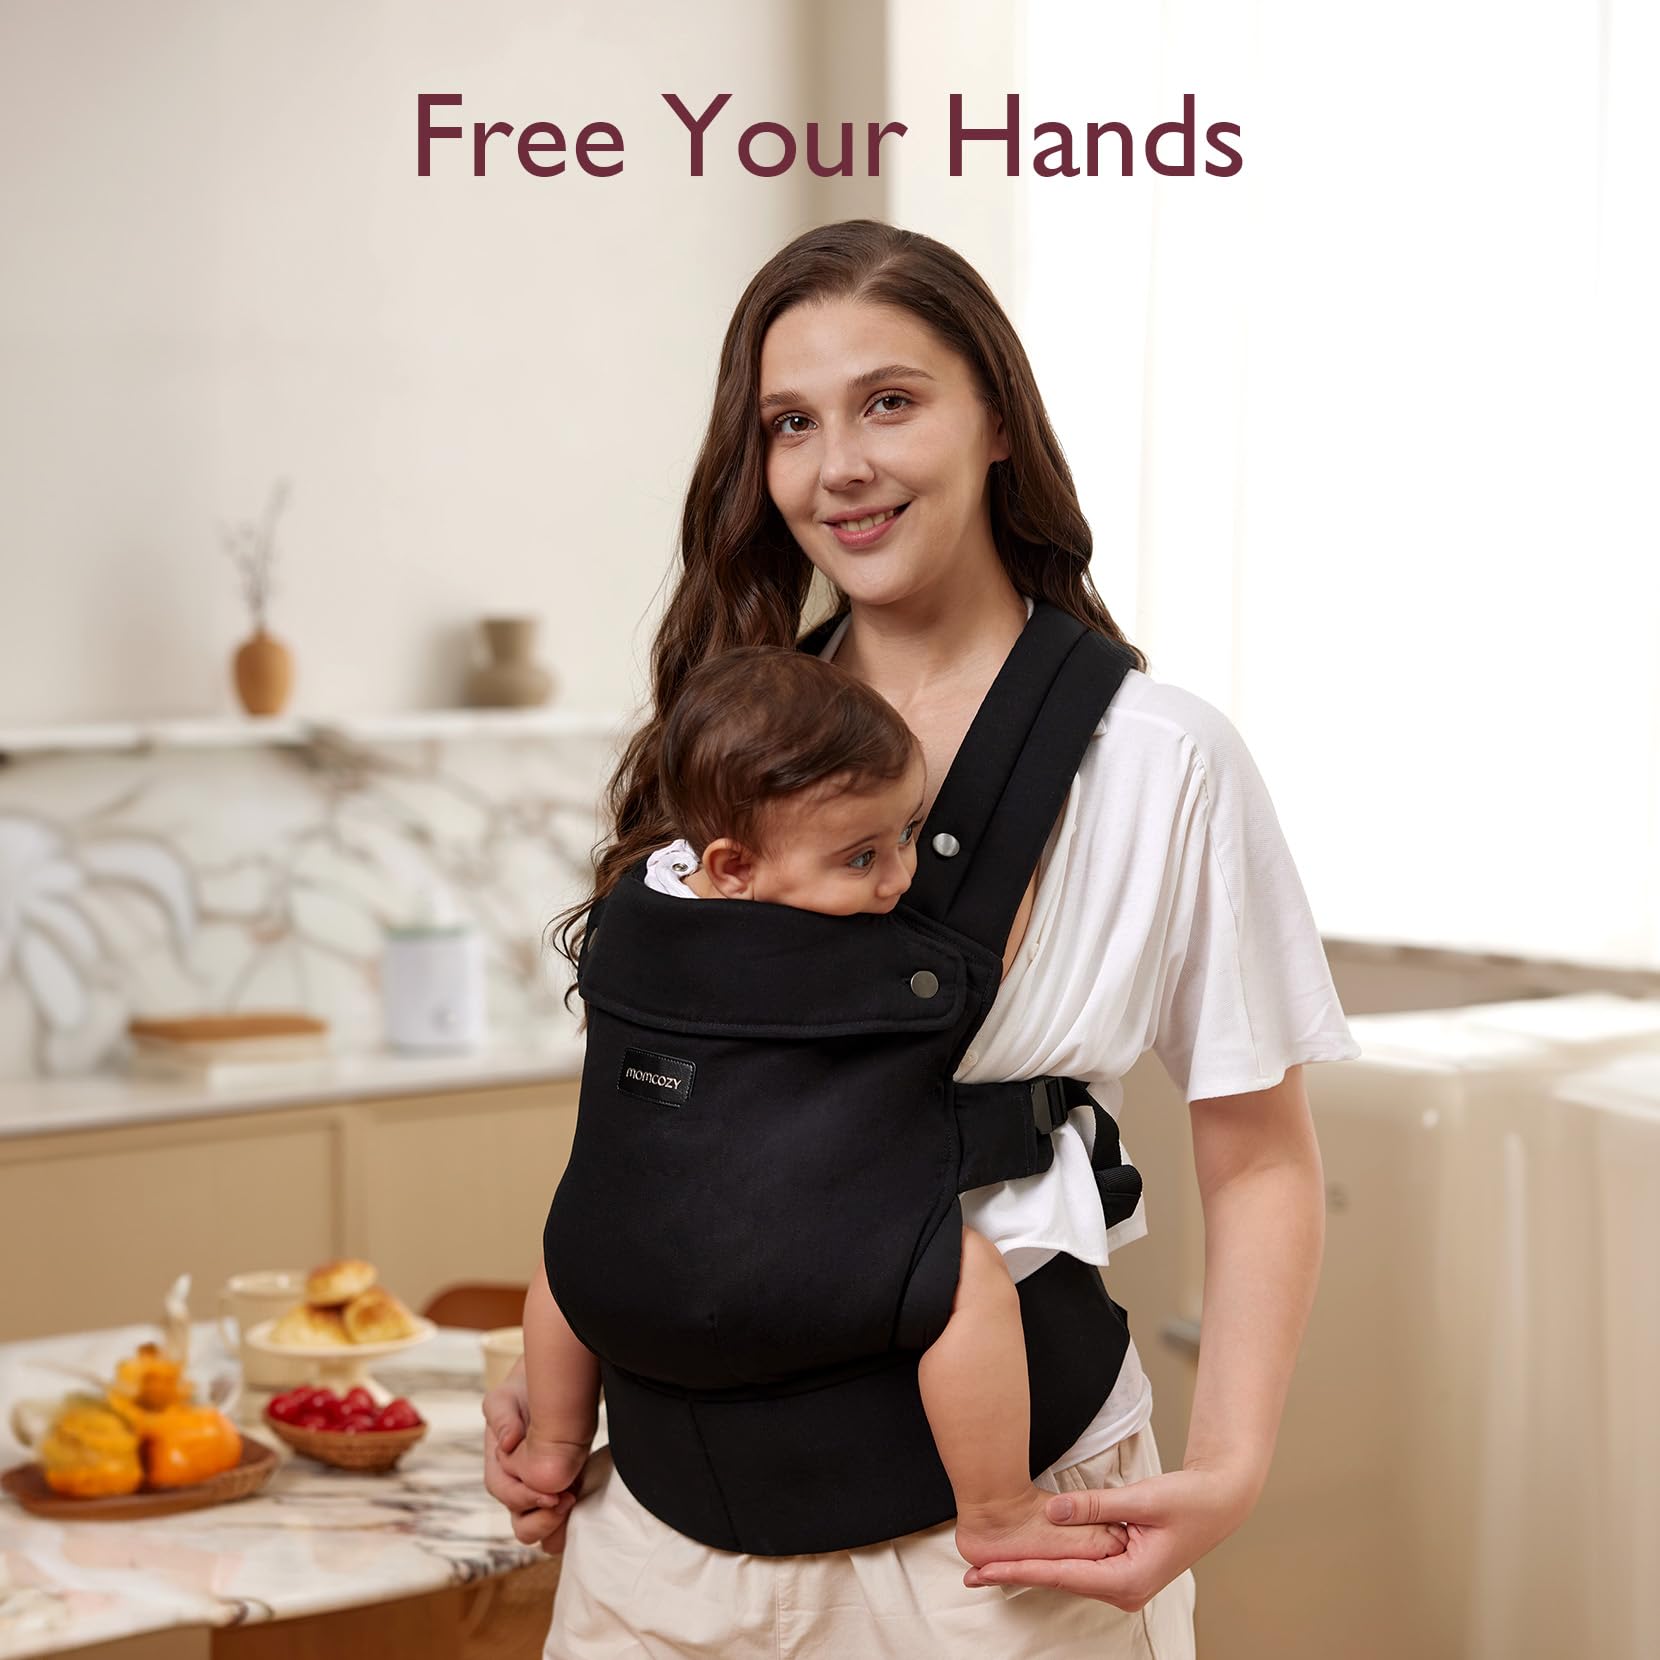 Momcozy Baby Wraps Carrier with Baby Carrier Classic